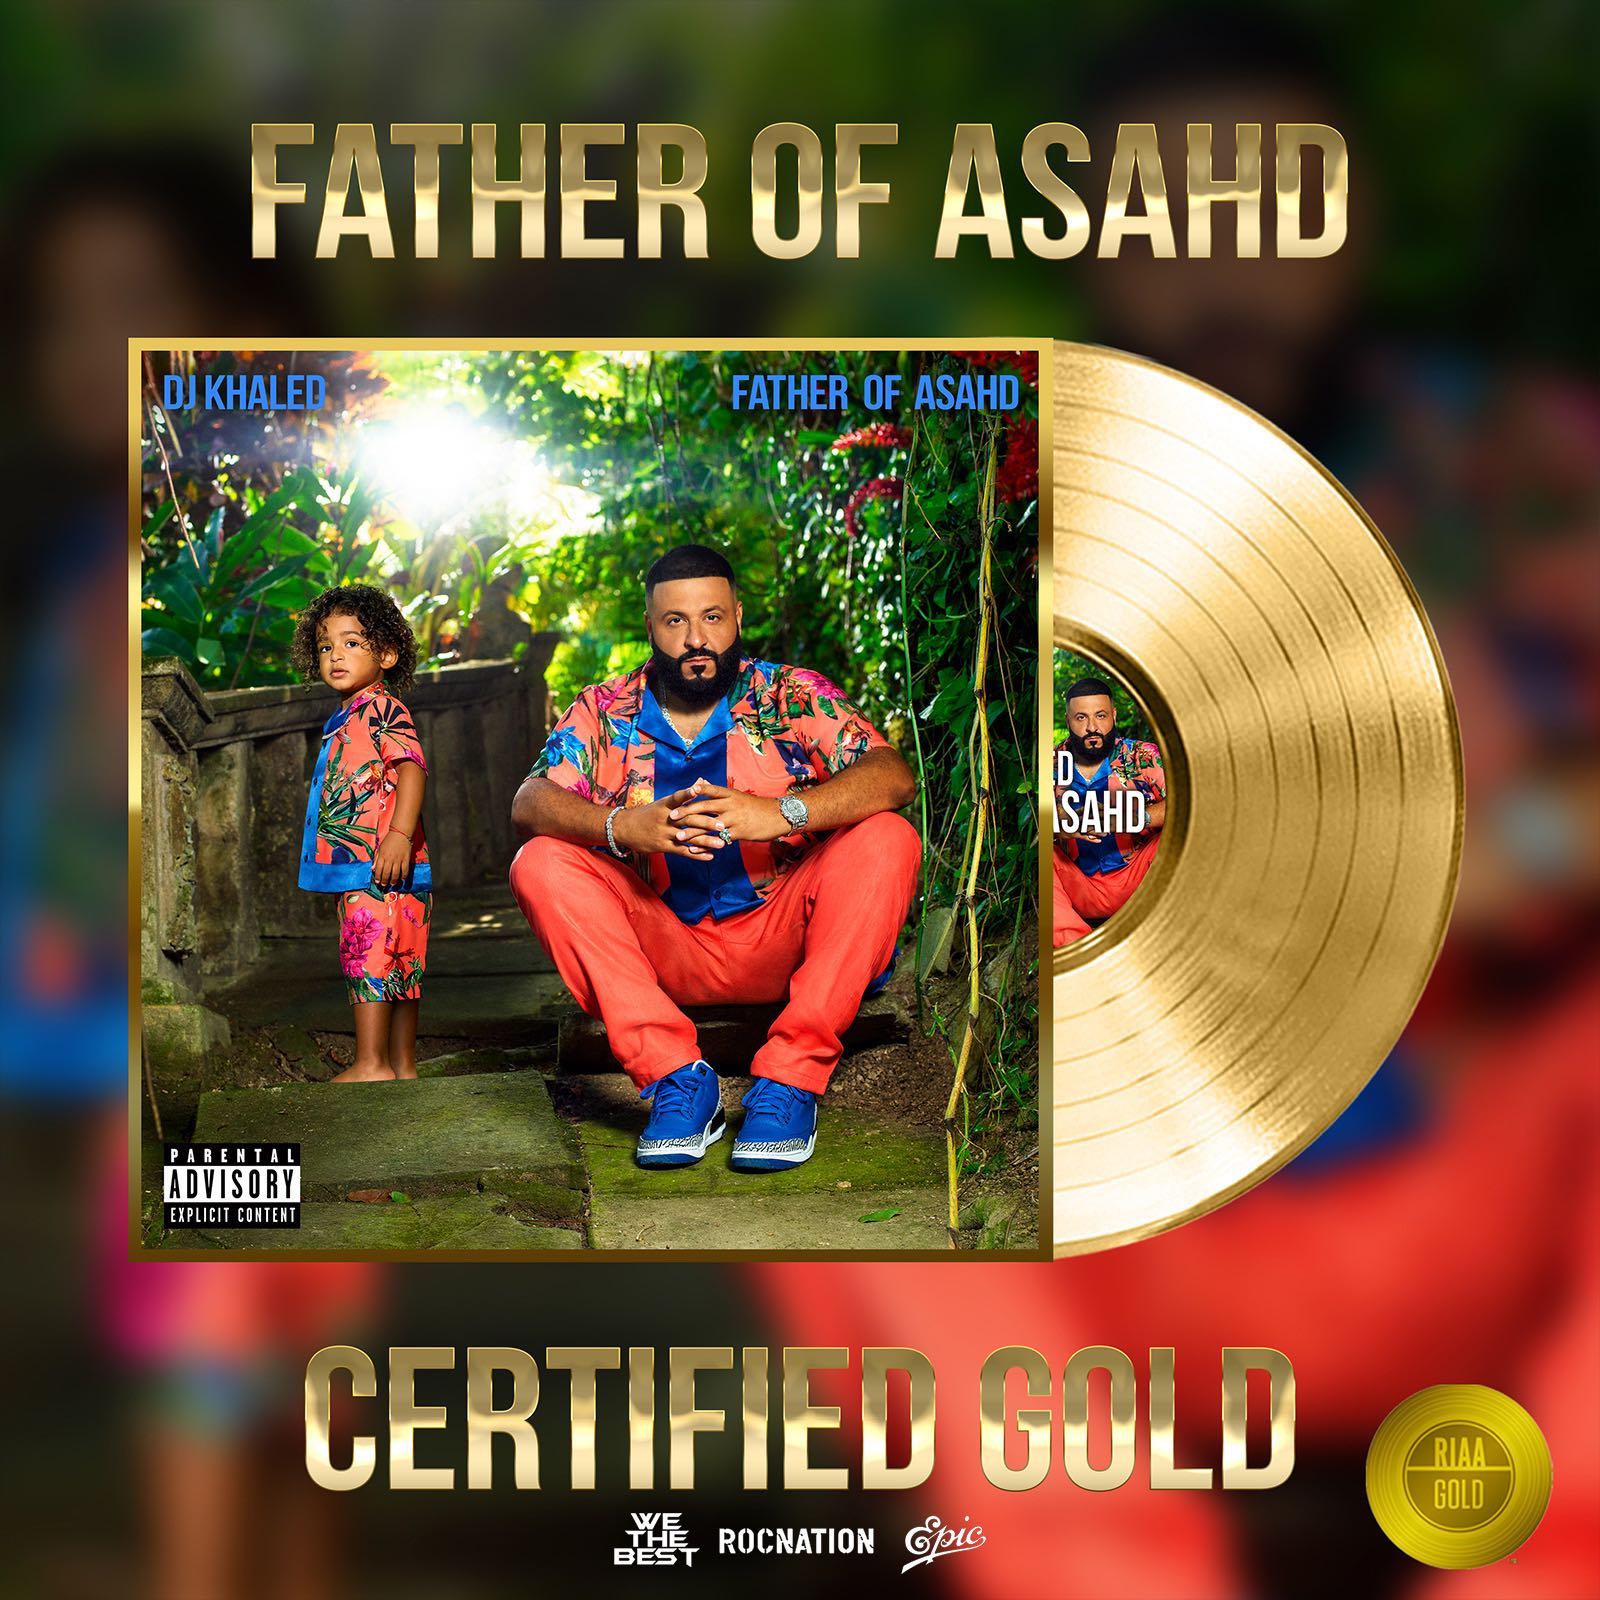 DJ KHALED album cover with a gold disk